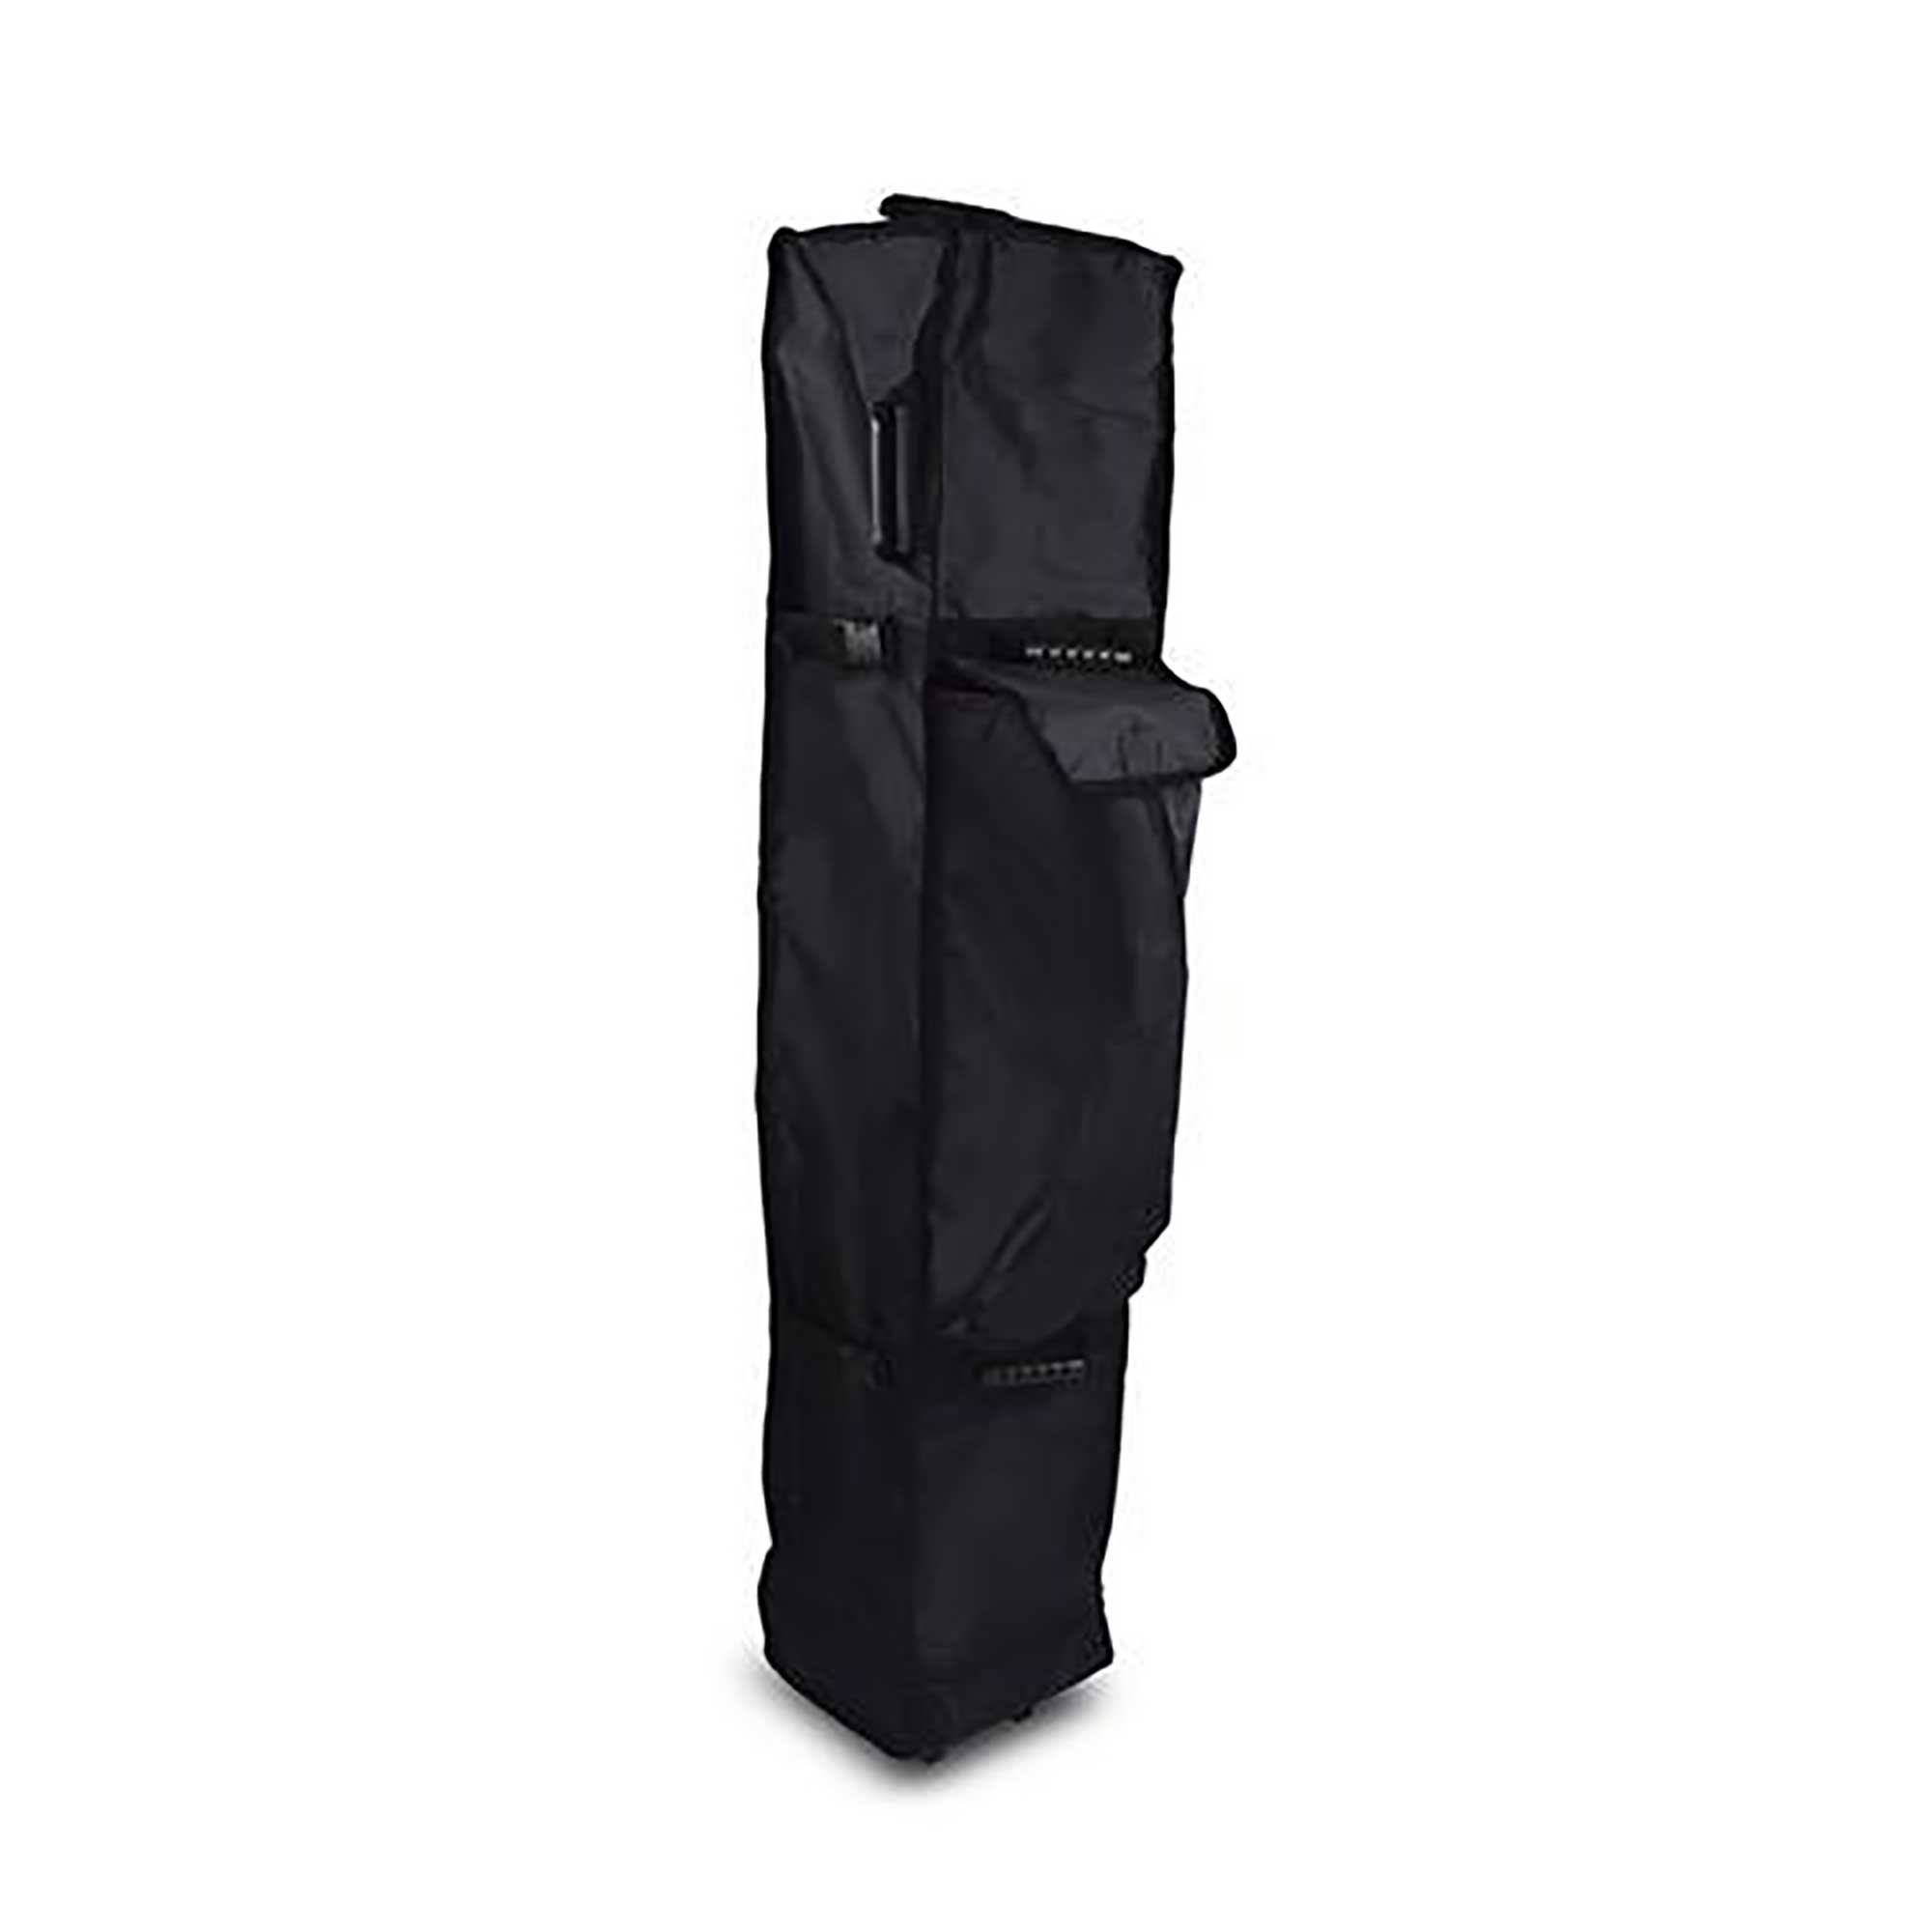 Canopy Carry Bag With Wheels | Irvine Orange County Ca